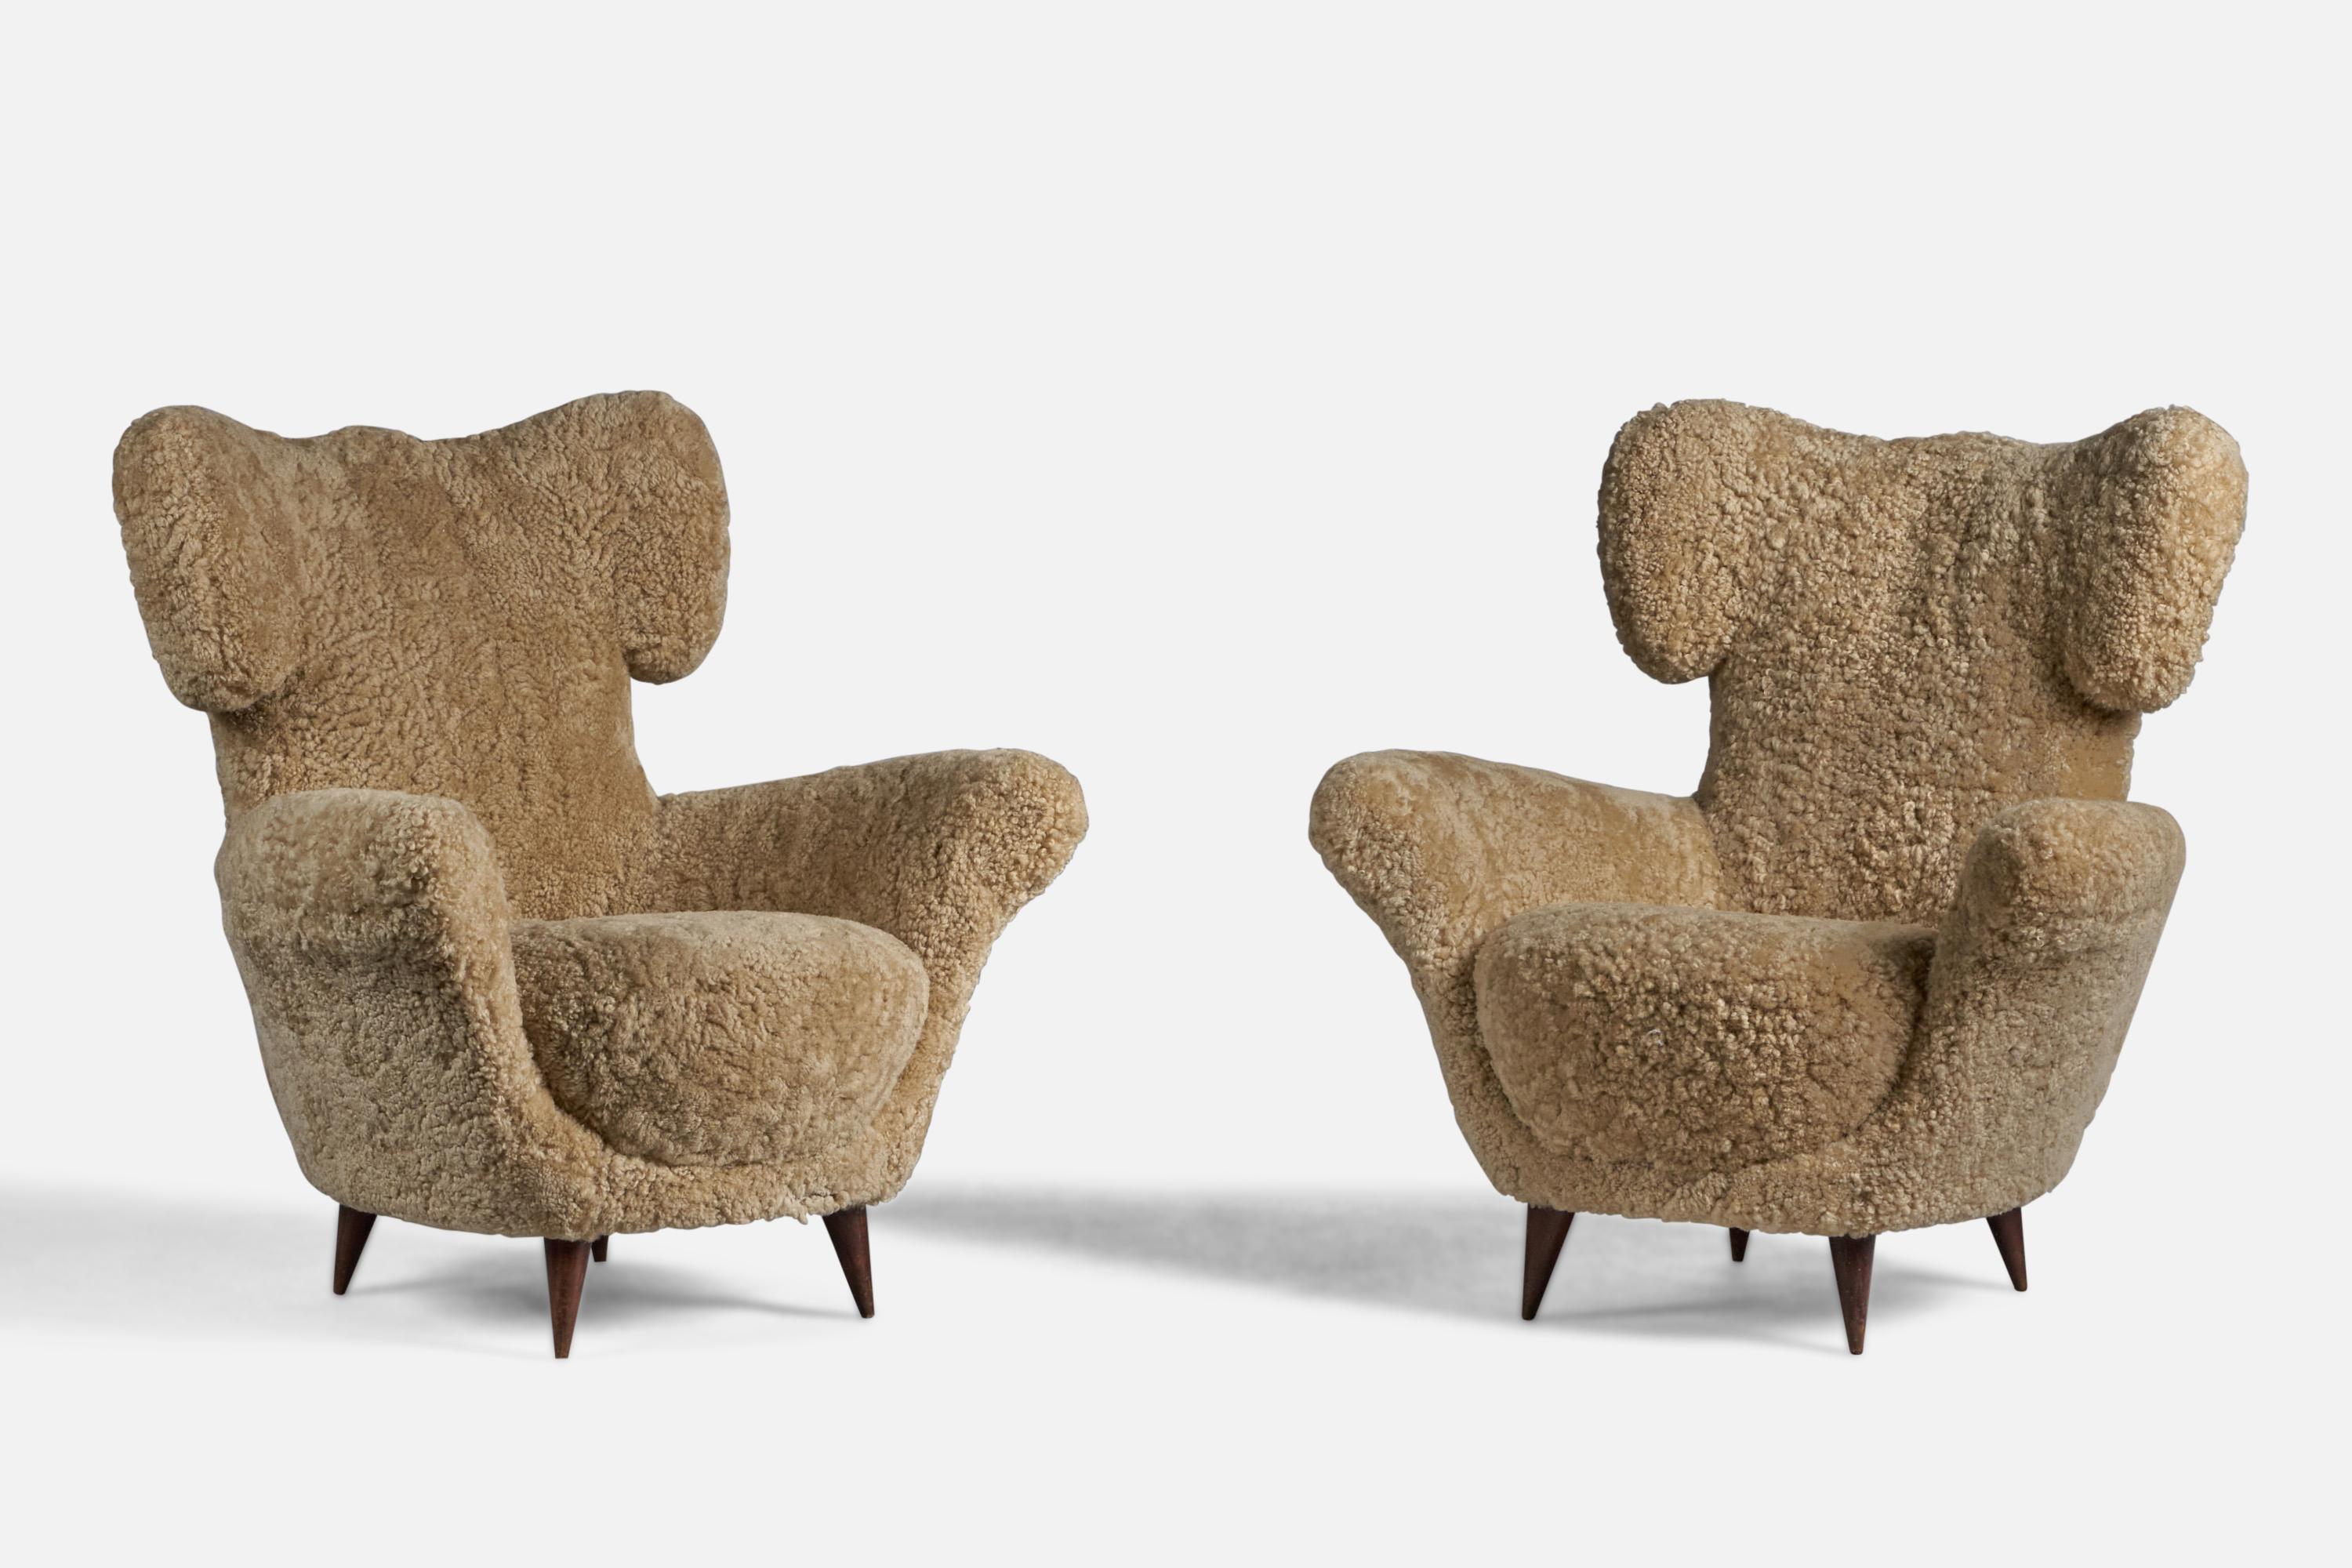 A pair of organic beige shearling and dark-stained wood lounge chairs attributed to Maurizio Tempestini, Italy, 1940s.

16.5